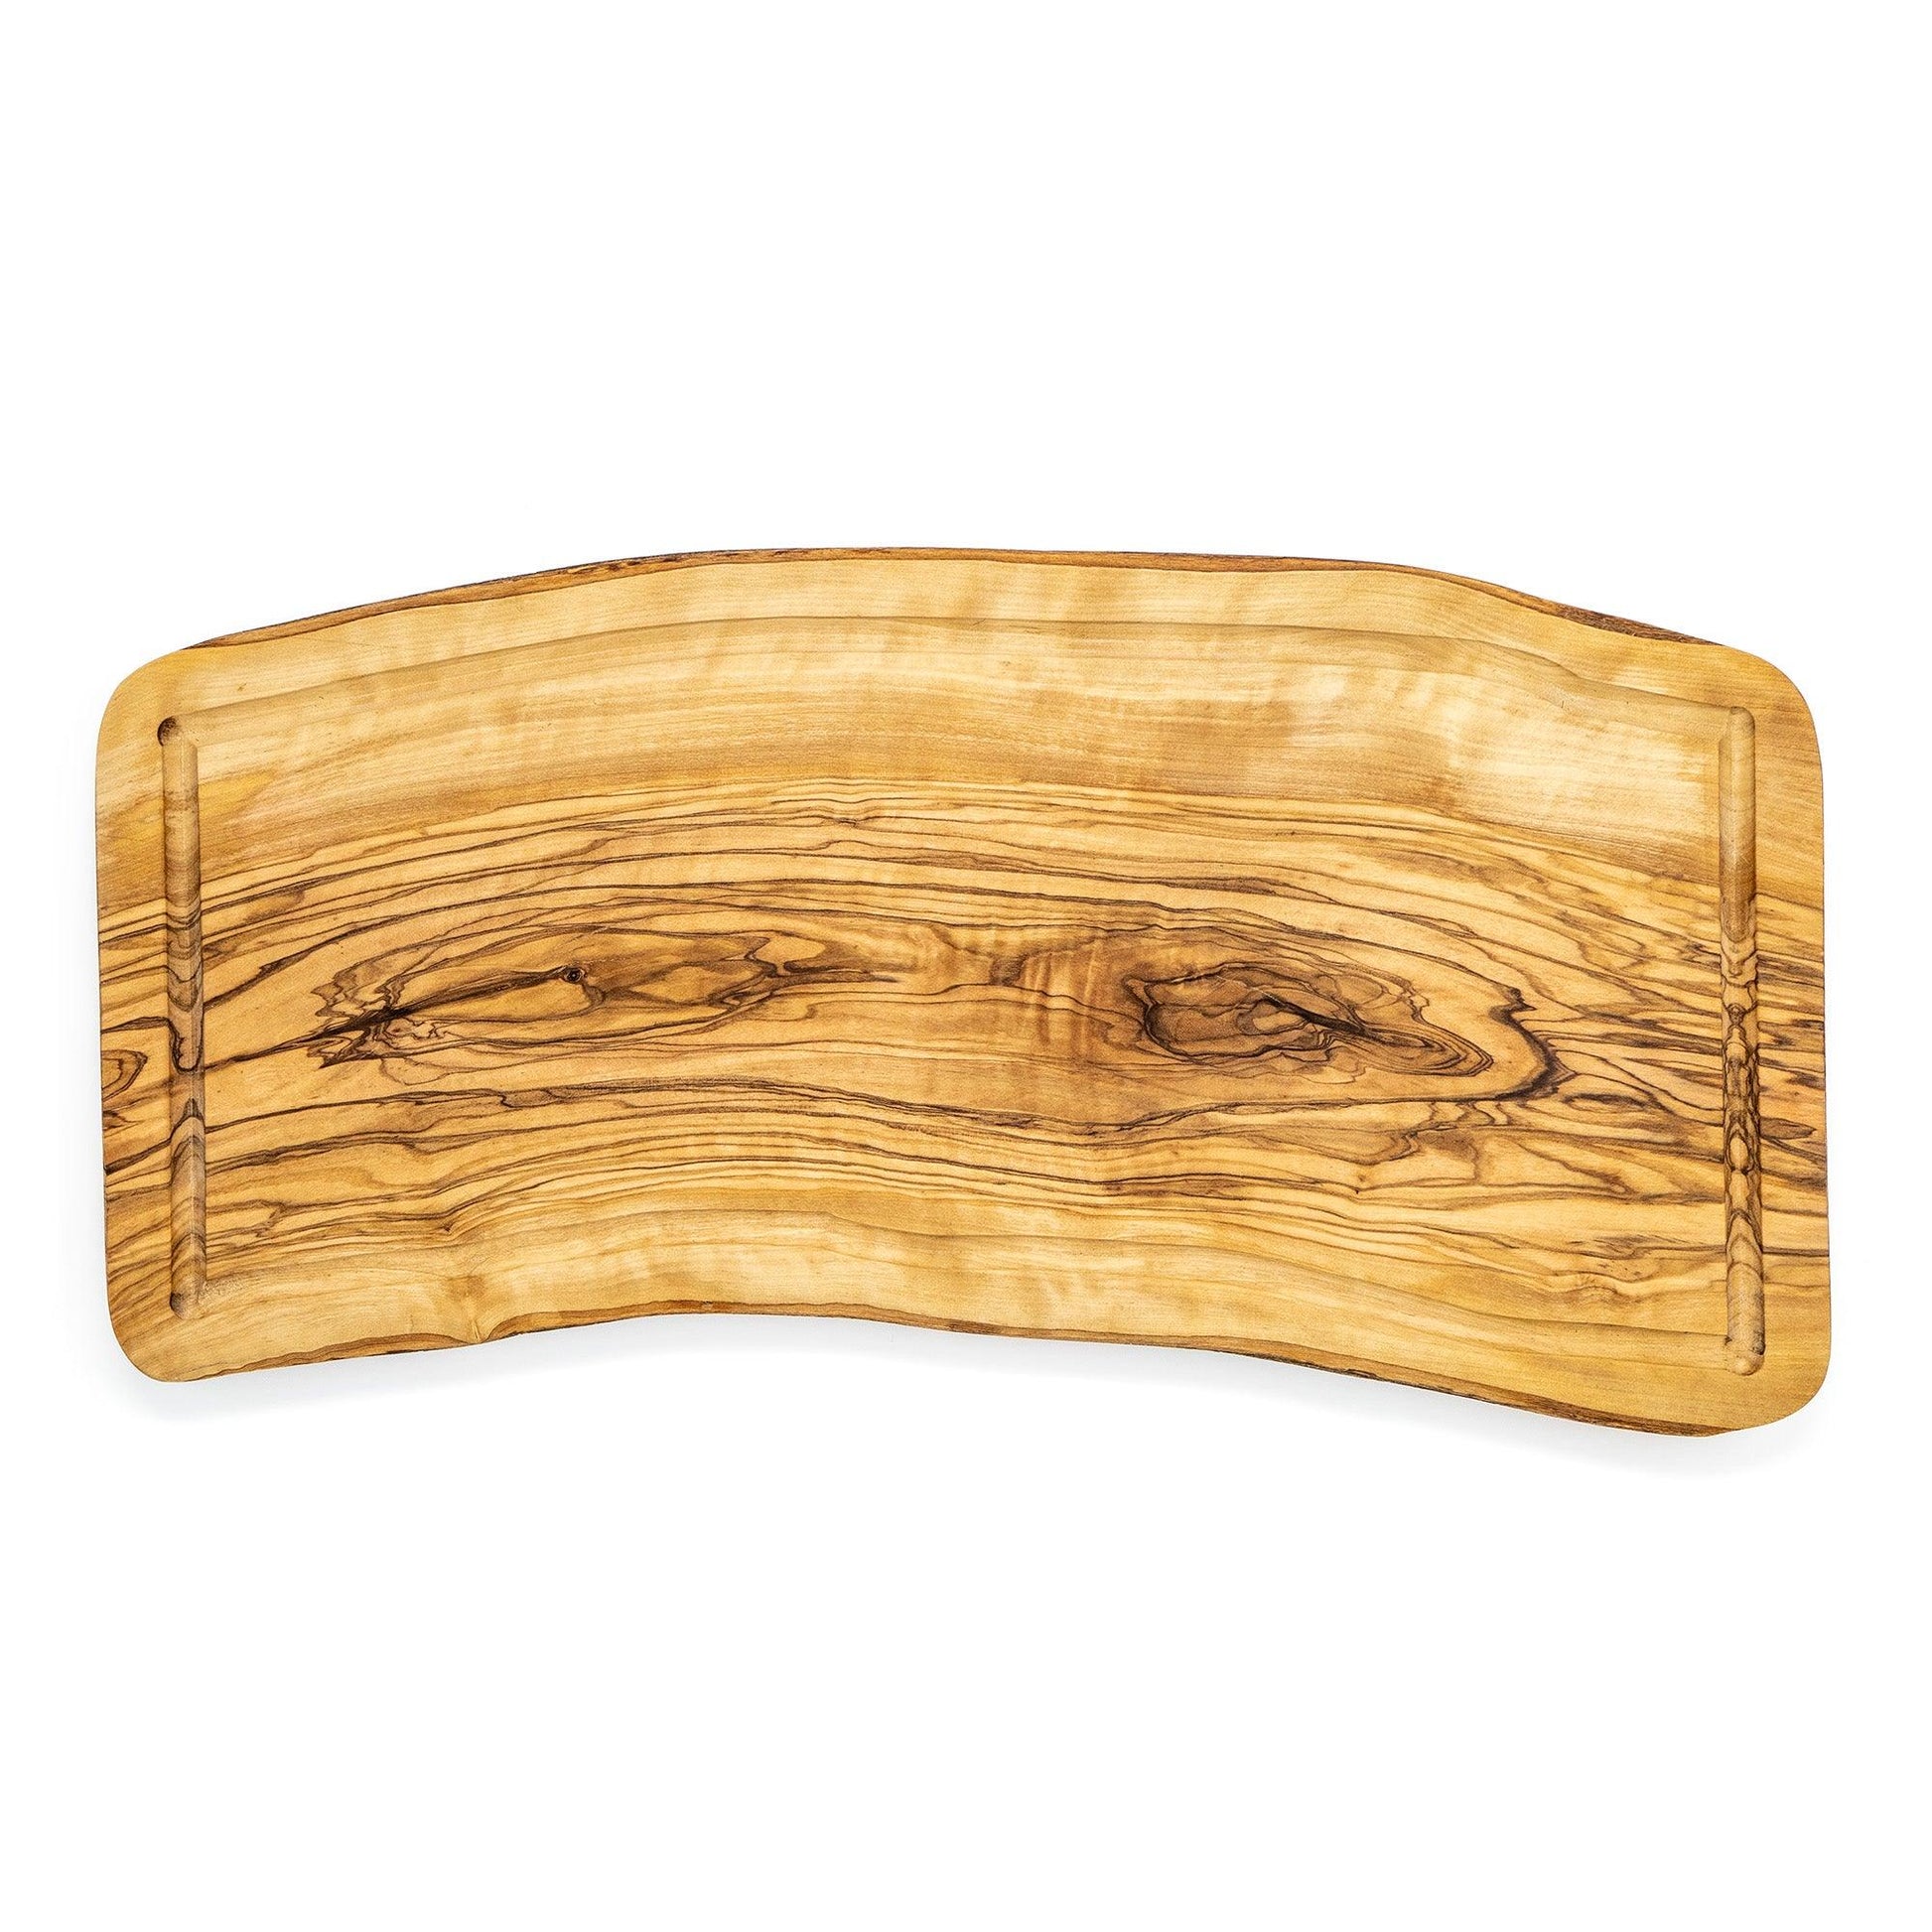 charcuterie and serving board for steaks bbq or vegan food, perfect gift idea!